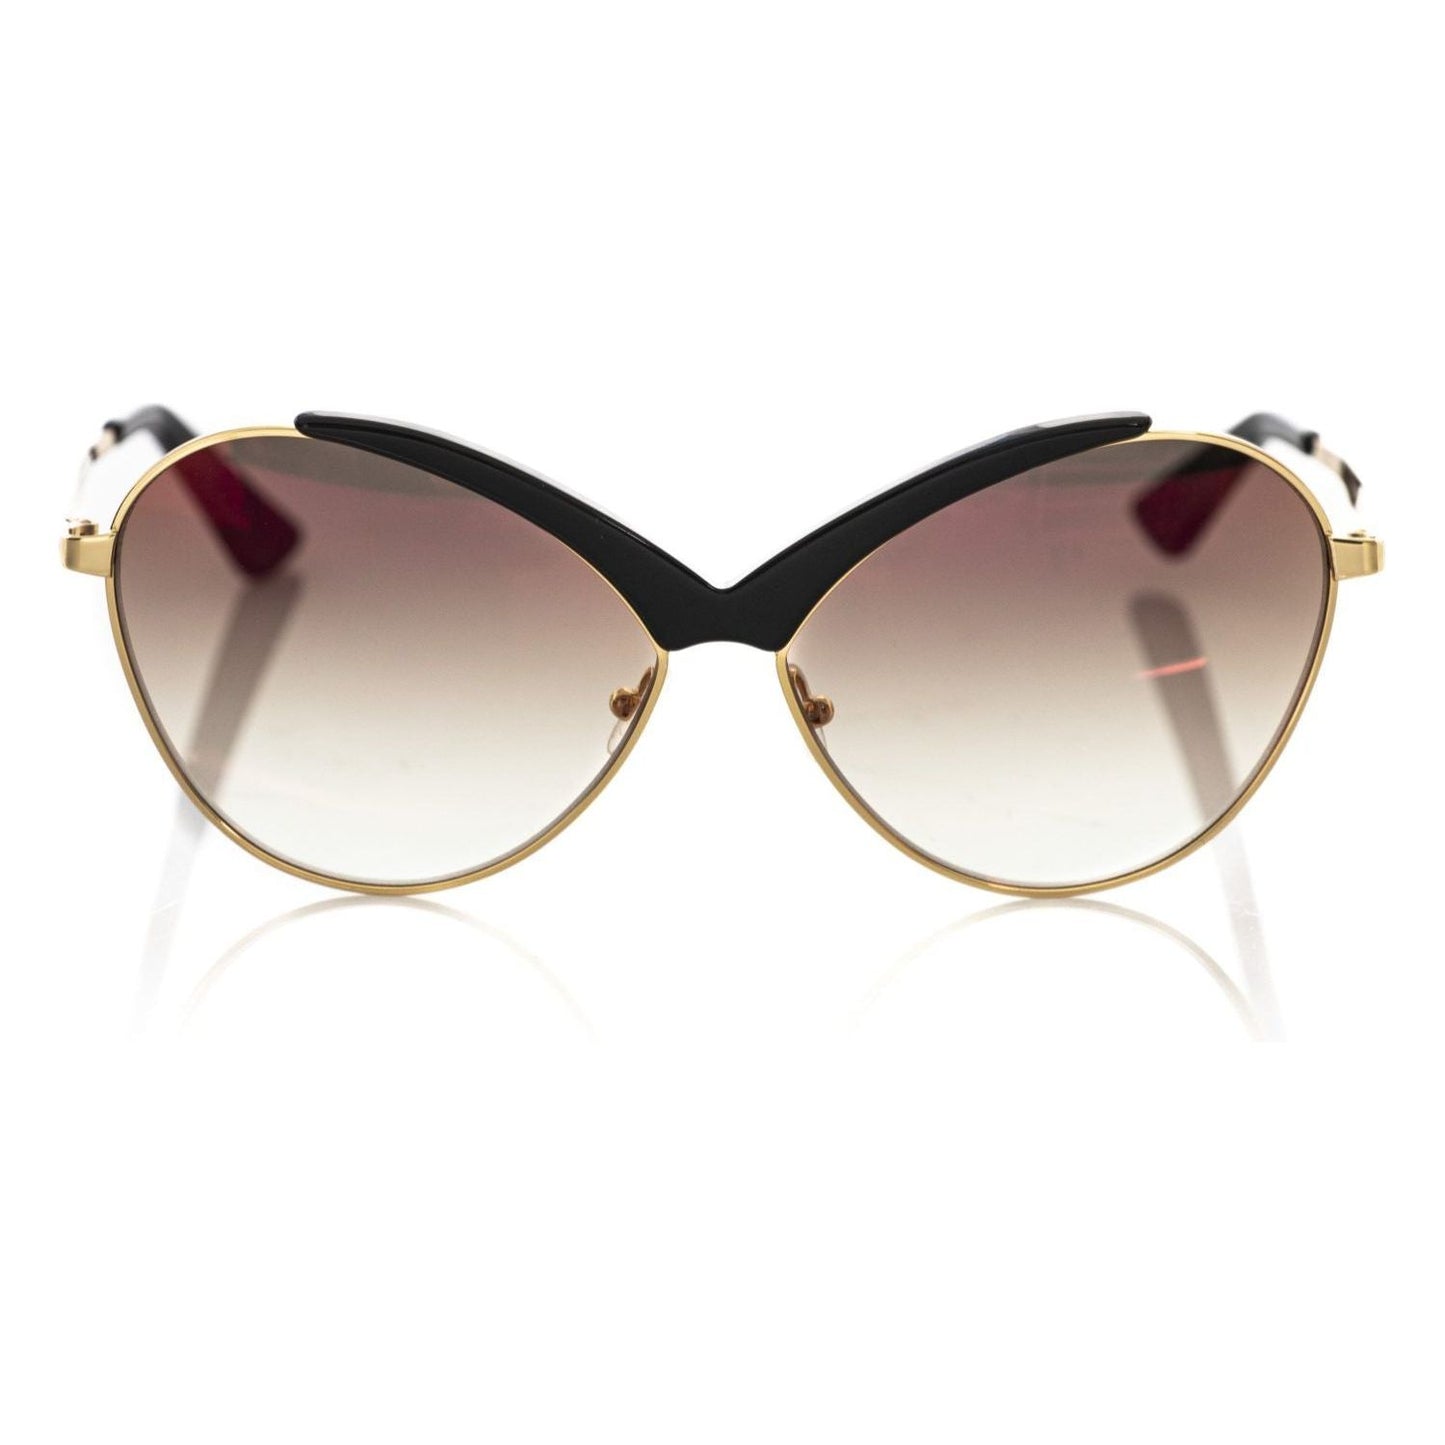 Chic Butterfly-Shaped Sunglasses in Glossy Black Frankie Morello